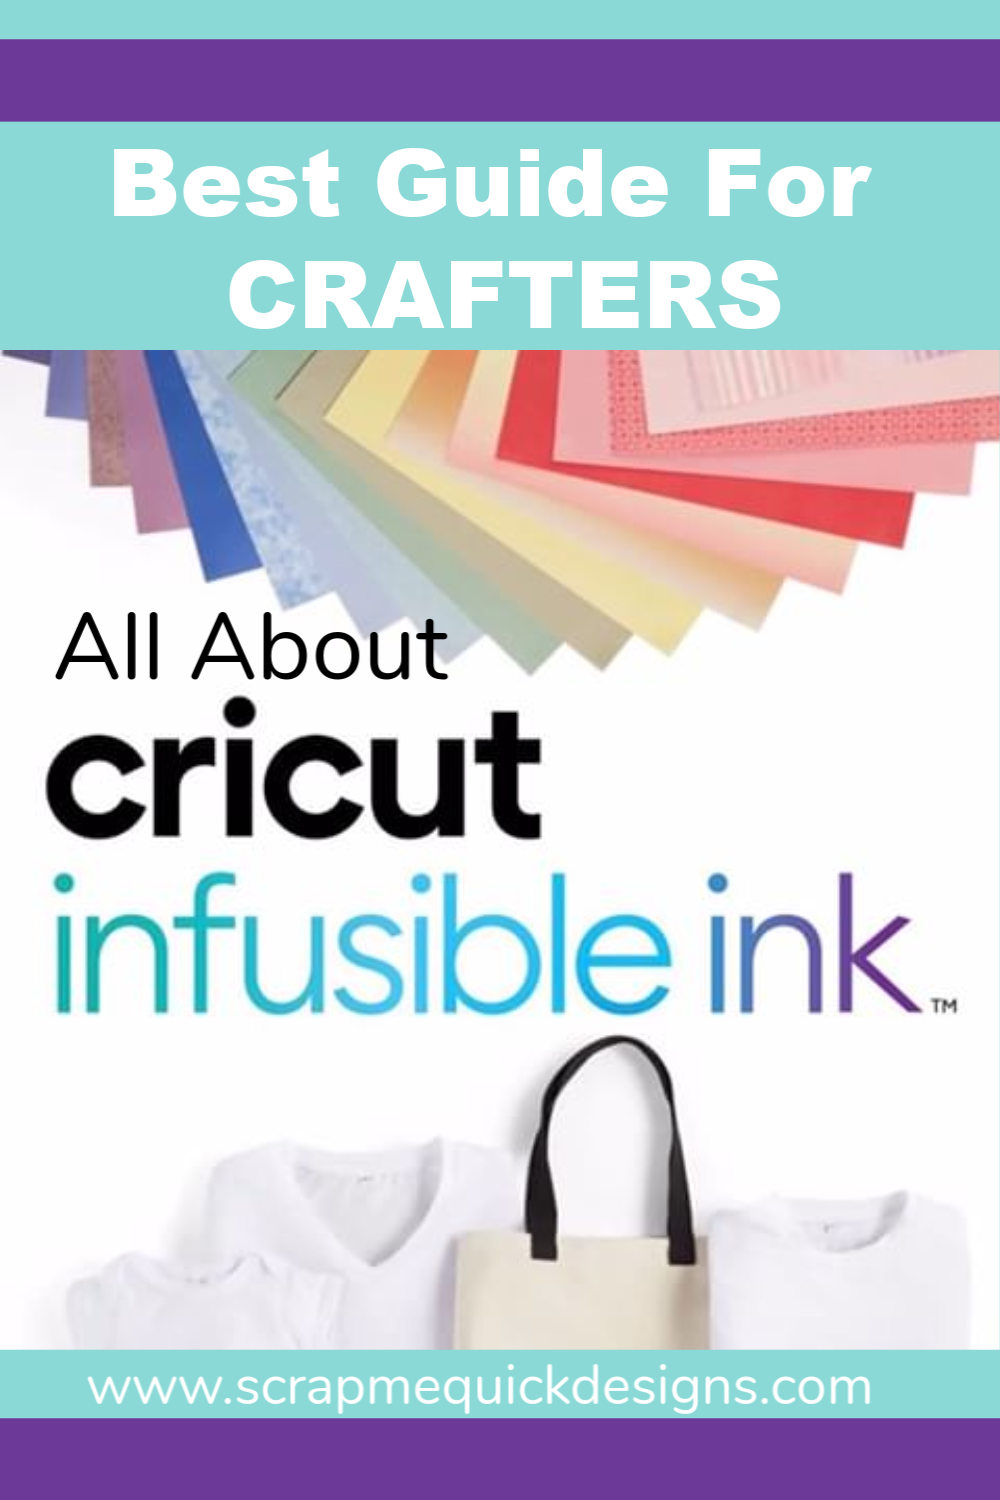 Cricut Infusible Ink: Quick Overview and Guide on How It Works